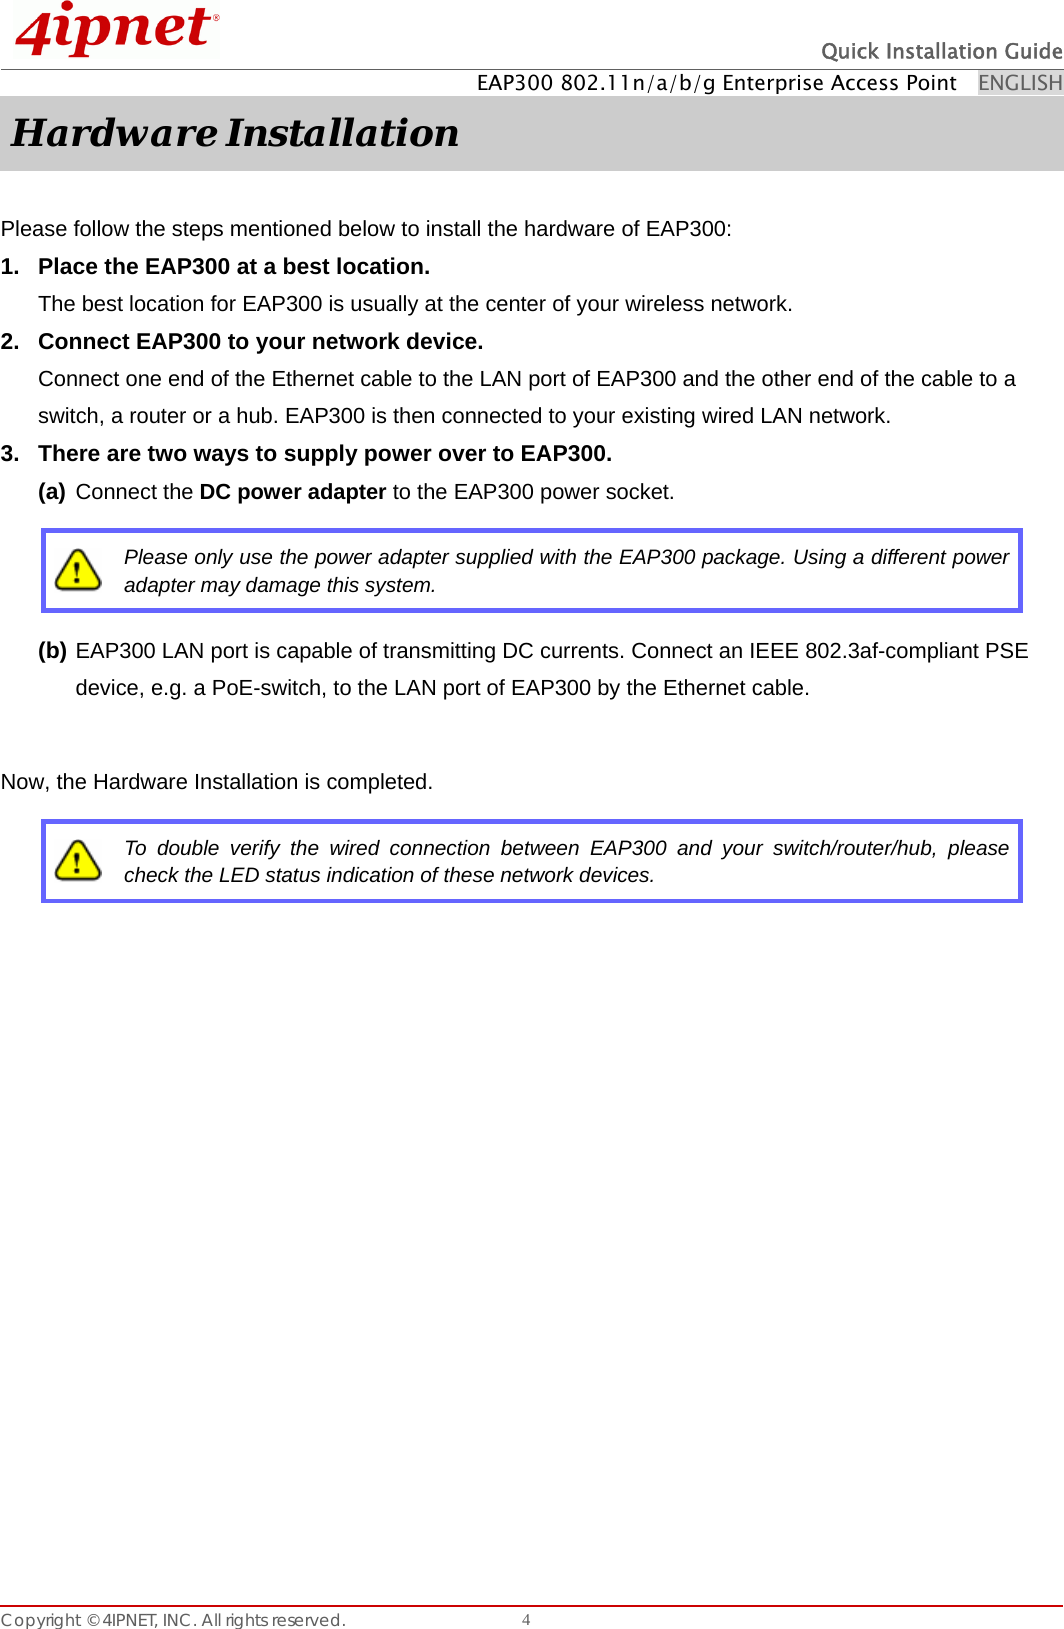  Quick Installation Guide EAP300 802.11n/a/b/g Enterprise Access Point    ENGLISH Copyright © 4IPNET, INC. All rights reserved.    4Hardware Installation  Please follow the steps mentioned below to install the hardware of EAP300: 1.  Place the EAP300 at a best location. The best location for EAP300 is usually at the center of your wireless network. 2.  Connect EAP300 to your network device. Connect one end of the Ethernet cable to the LAN port of EAP300 and the other end of the cable to a switch, a router or a hub. EAP300 is then connected to your existing wired LAN network.   3.  There are two ways to supply power over to EAP300. (a) Connect the DC power adapter to the EAP300 power socket.    Please only use the power adapter supplied with the EAP300 package. Using a different power adapter may damage this system. (b) EAP300 LAN port is capable of transmitting DC currents. Connect an IEEE 802.3af-compliant PSE device, e.g. a PoE-switch, to the LAN port of EAP300 by the Ethernet cable.  Now, the Hardware Installation is completed.  To double verify the wired connection between EAP300 and your switch/router/hub, please check the LED status indication of these network devices.  